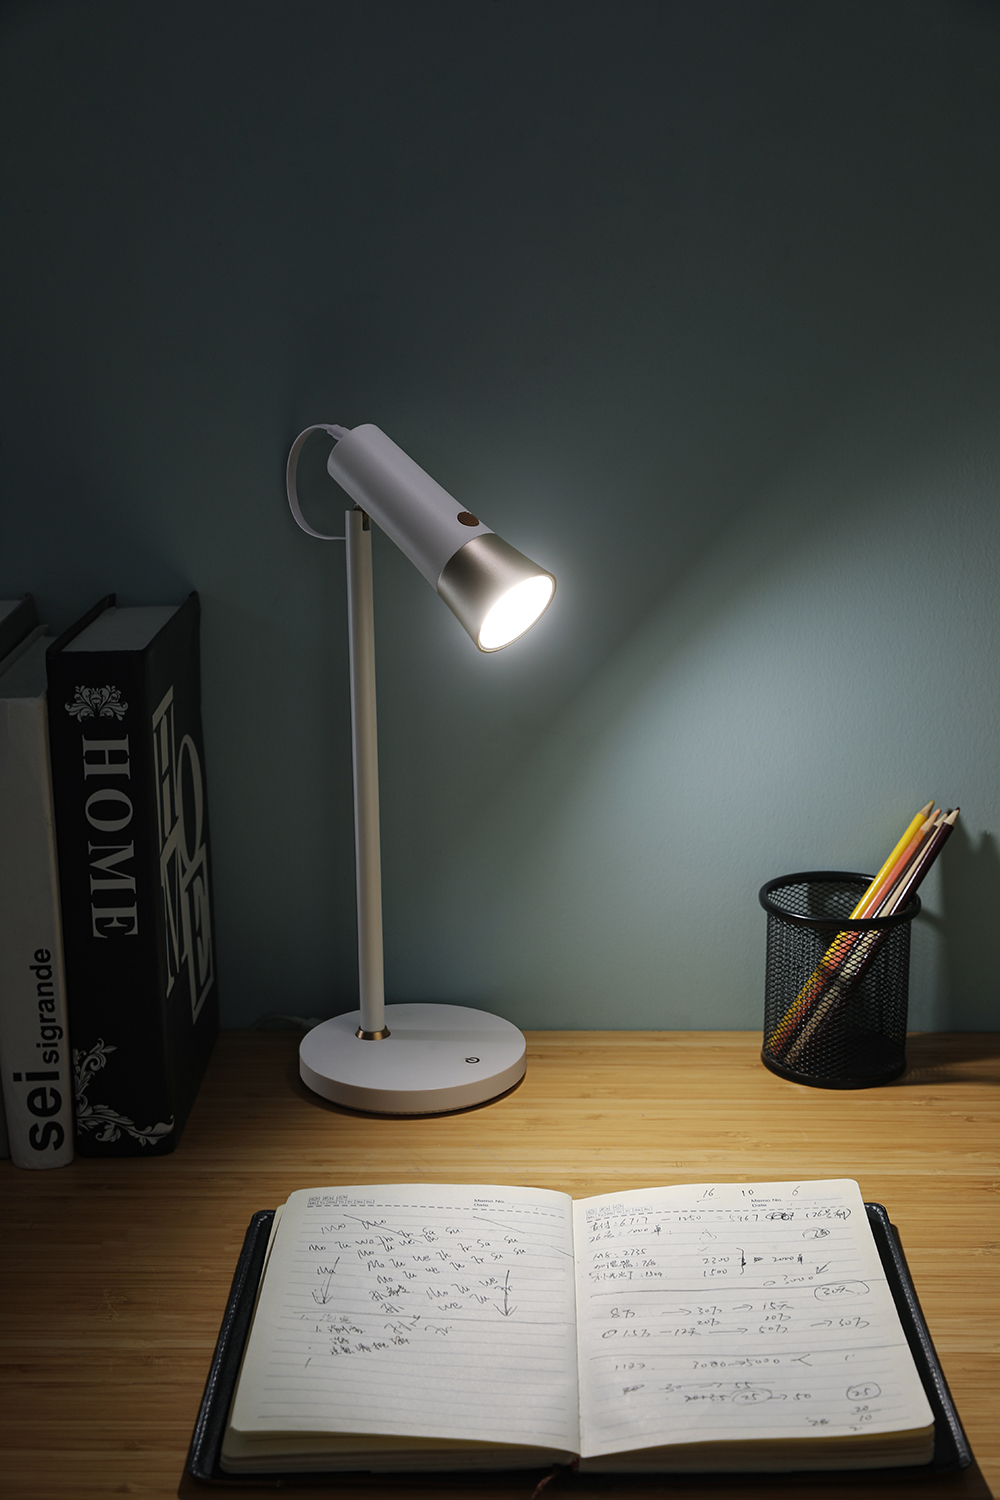 WILIT-F3D-Portable-300LM-LED-Desk-Lamp-With-Torch-Function-Built-in-18650-37V2200mAh-Lithium-Battery-1947422-6